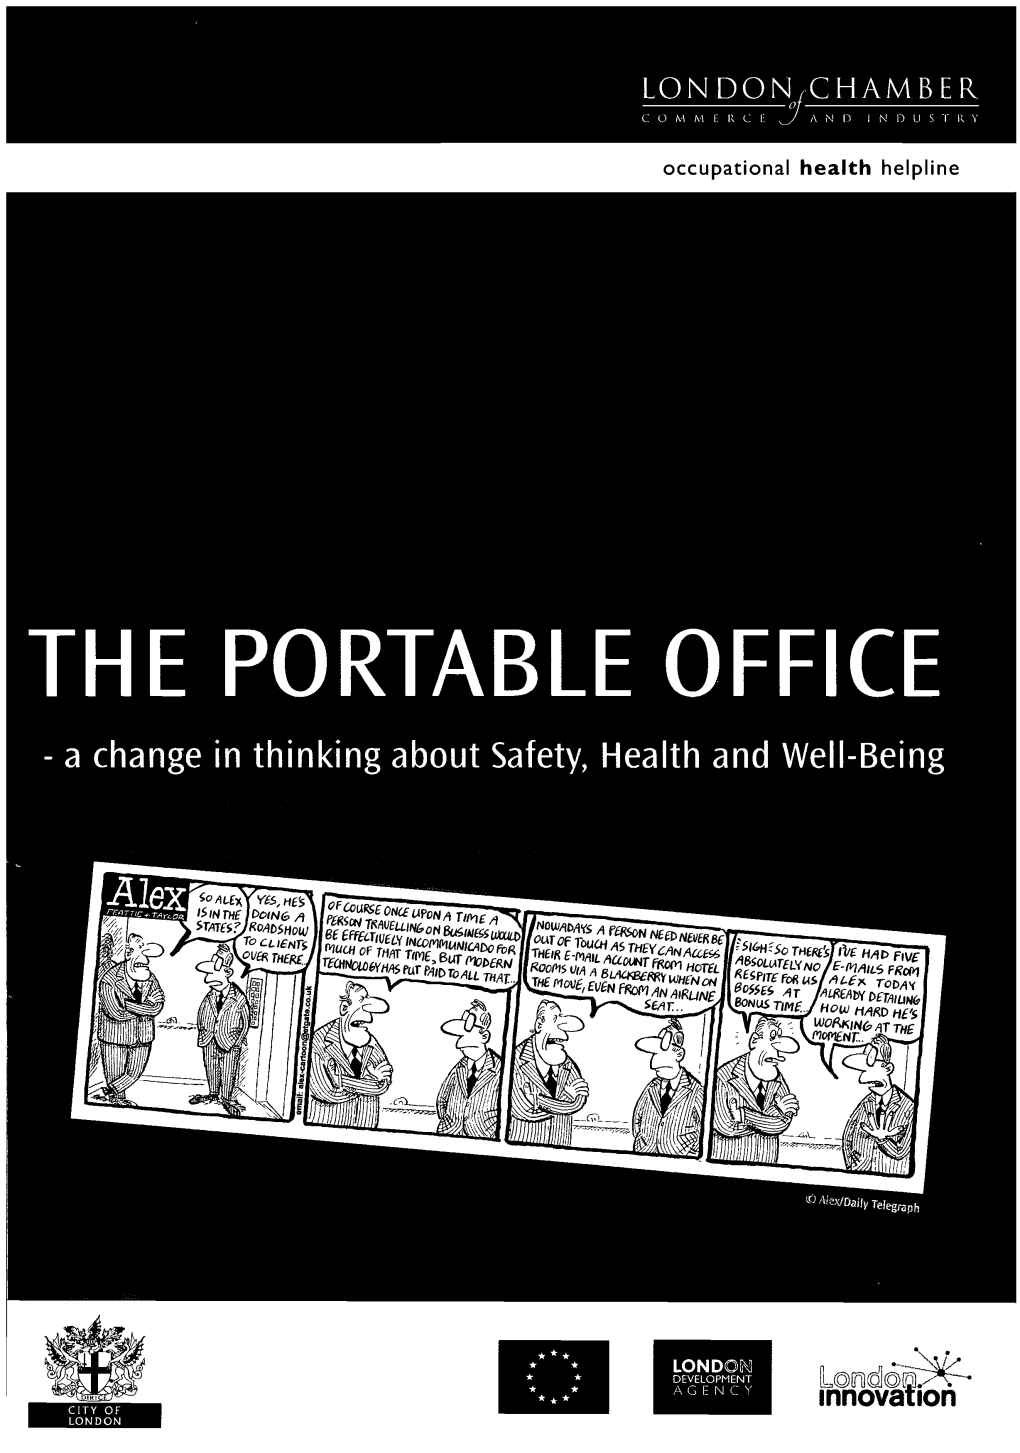 The Portable Office: Safety, Health and Well-Being